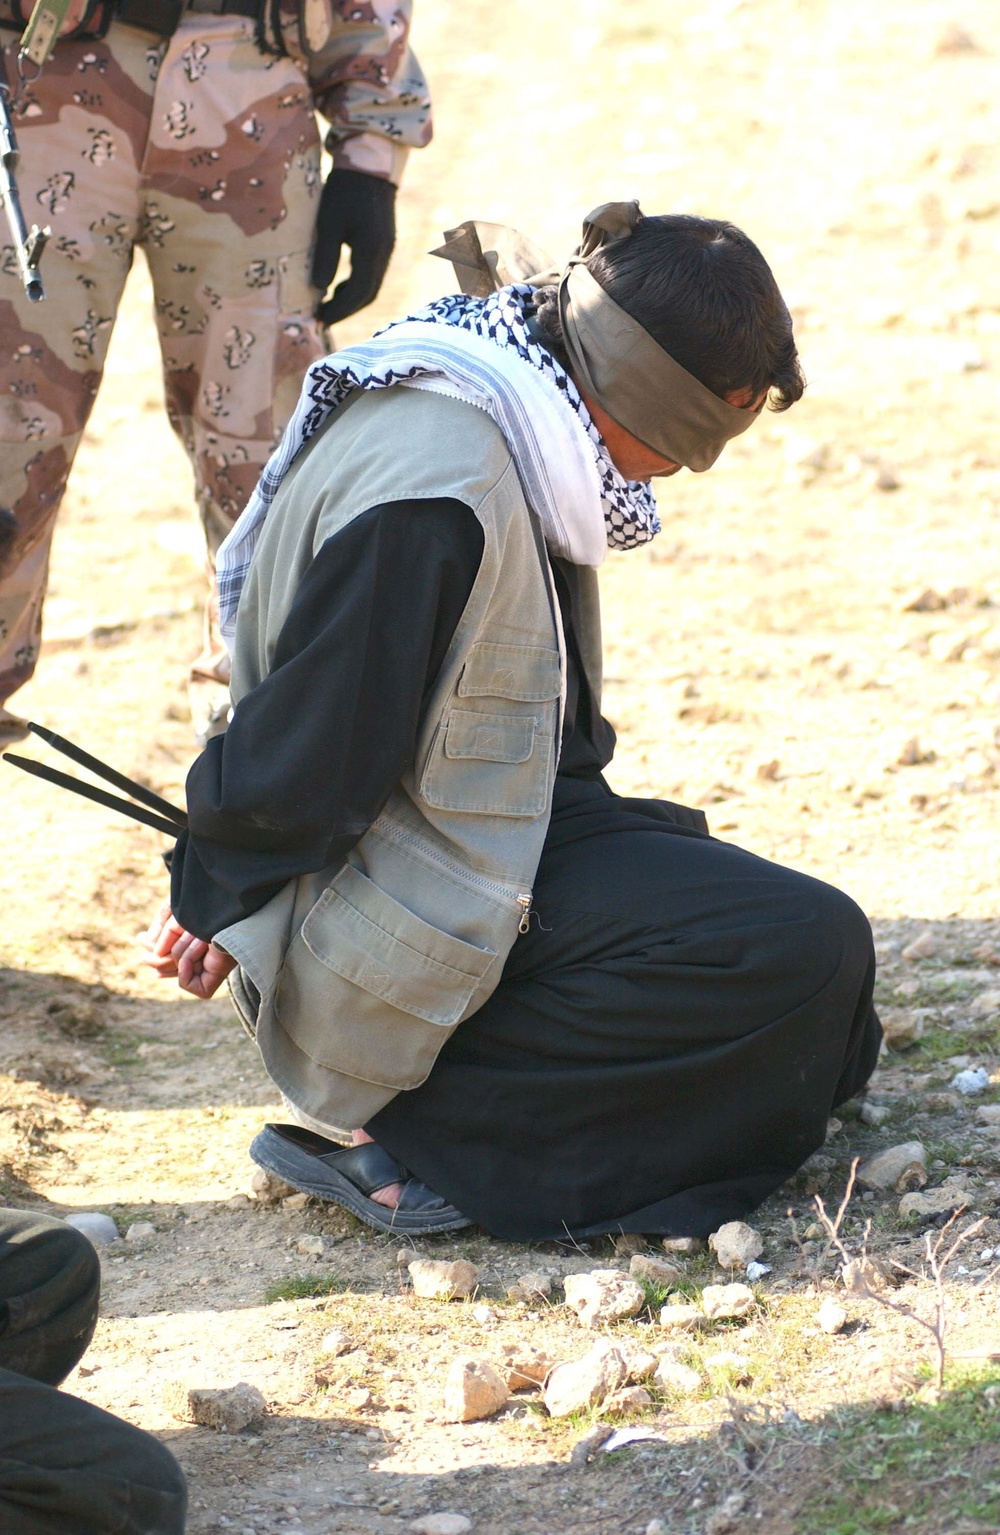 A detained Iraqi man kneels just off the roadway